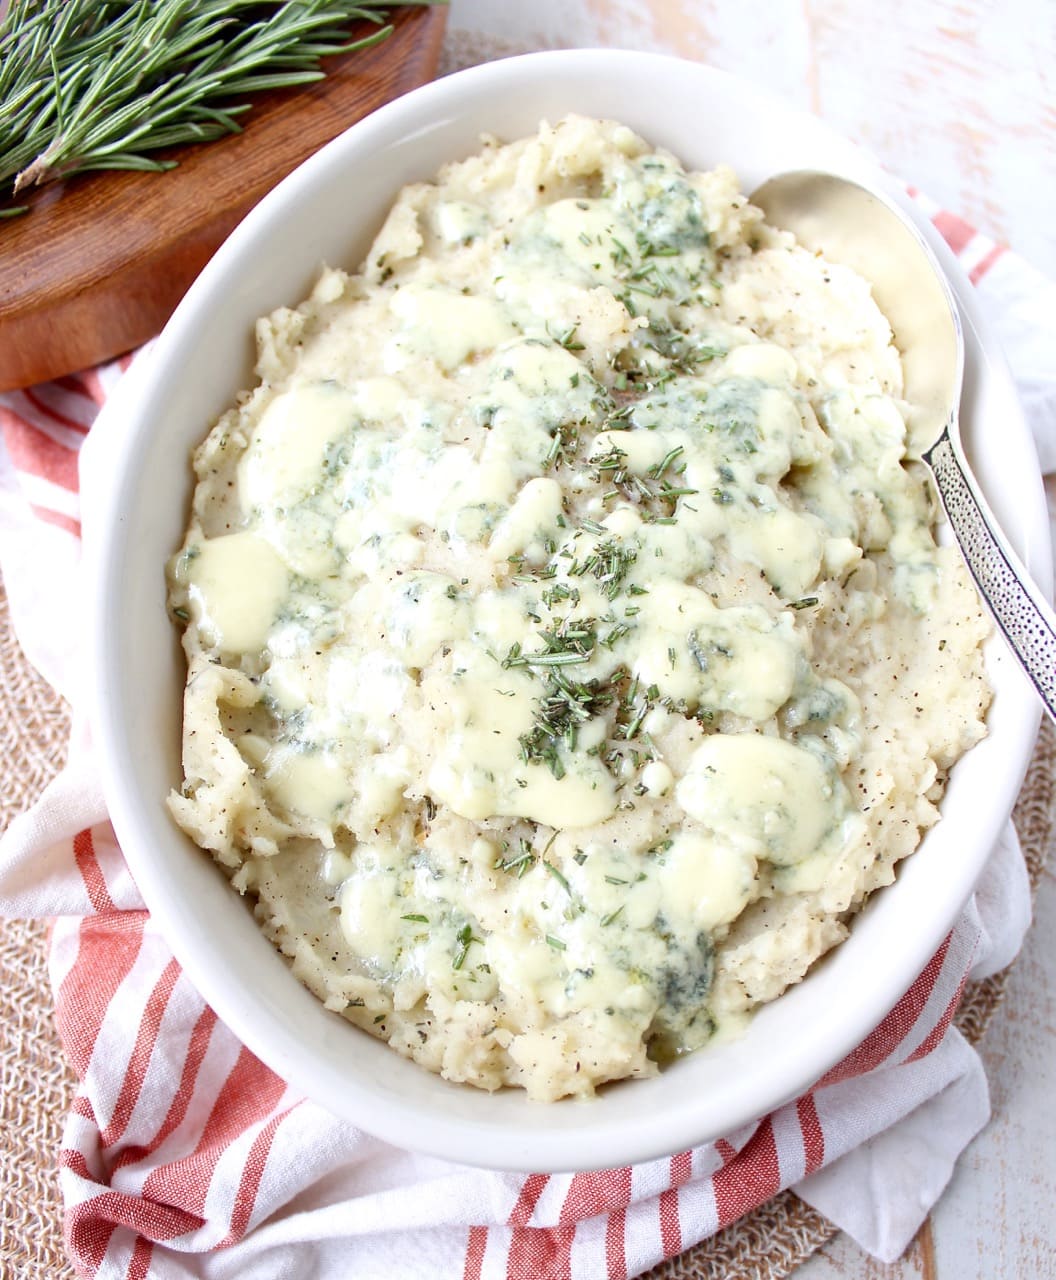 mashed potatoes in bowl with large spoon